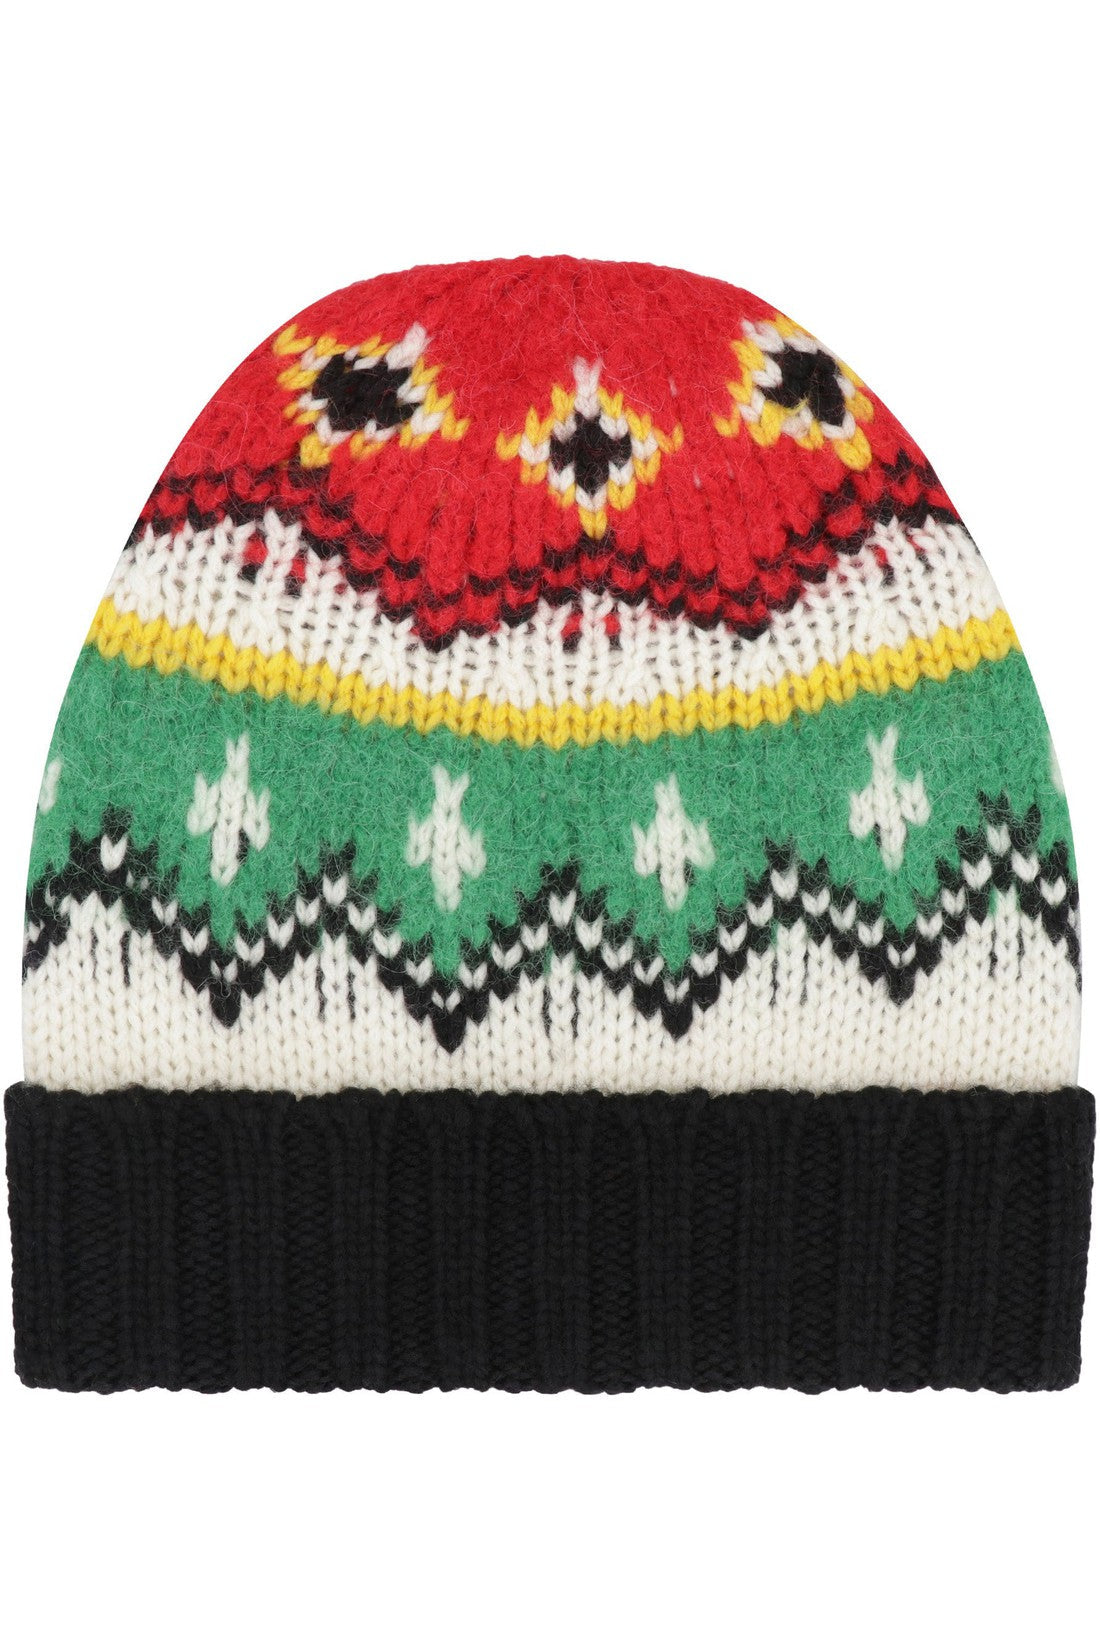 Moncler Grenoble-OUTLET-SALE-knitted wool hat-ARCHIVIST